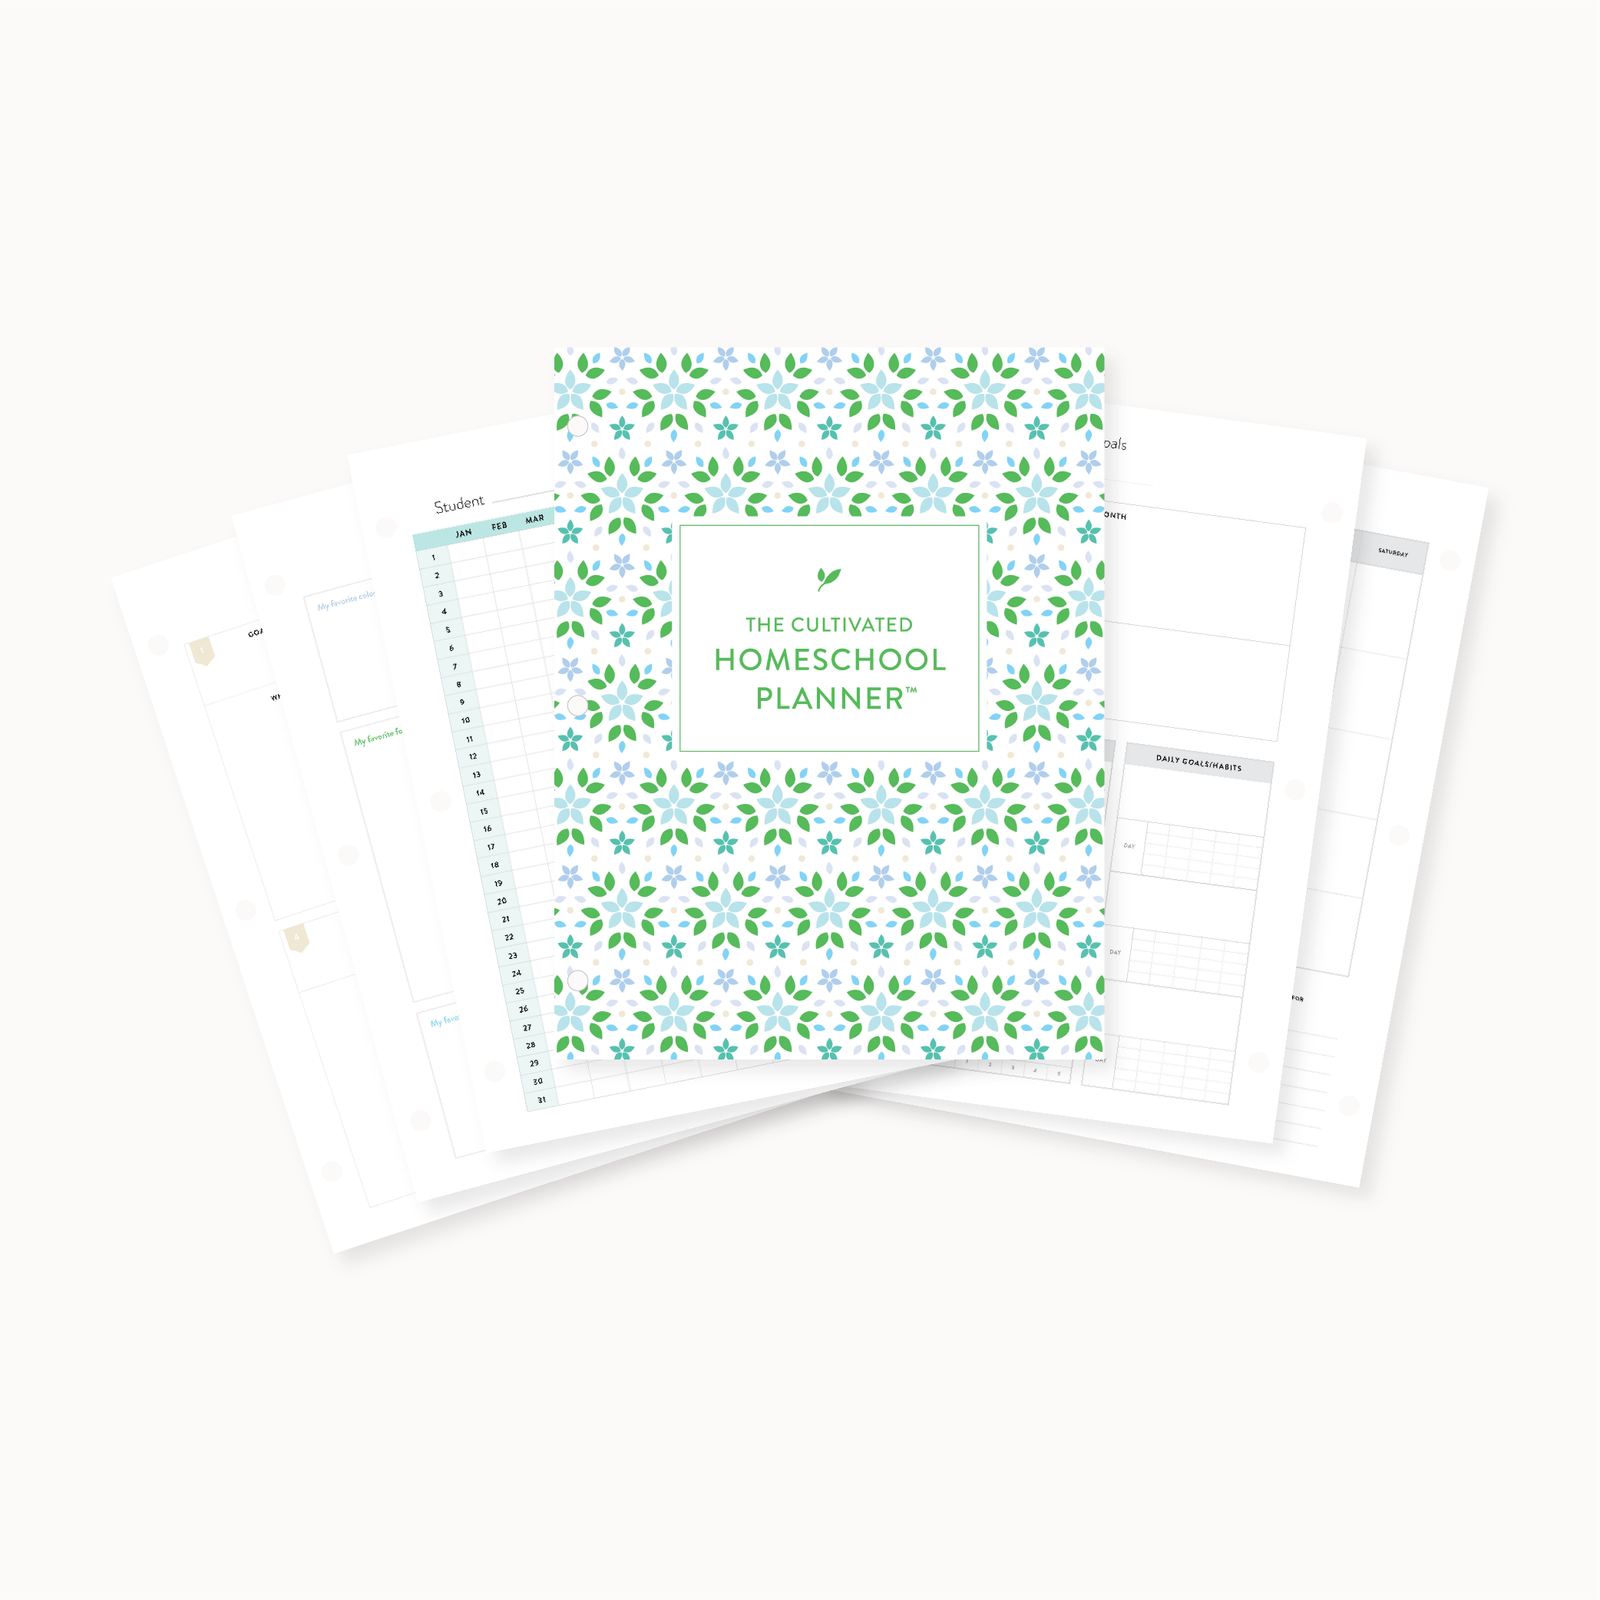 CULTIVATED HOMESCHOOL PLANNER